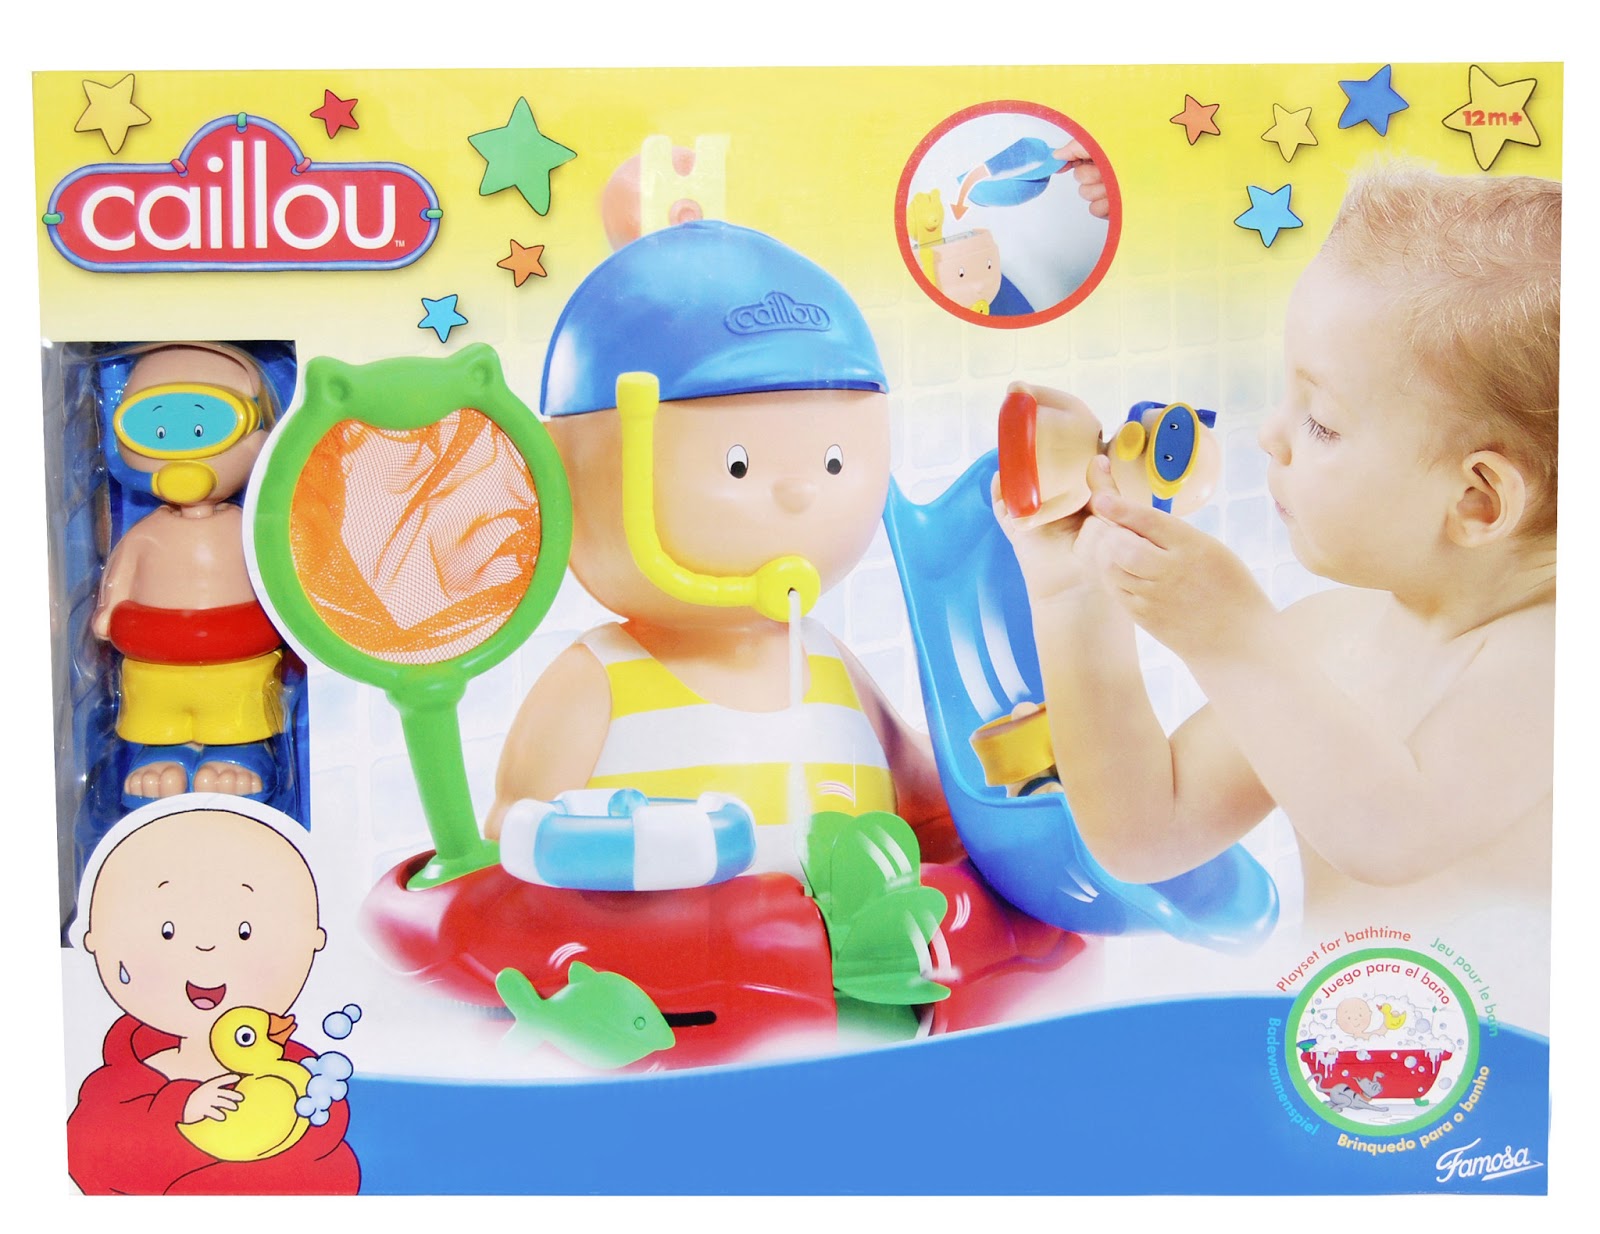 Caillou Bathtime With You Review Outnumbered 3 To 1